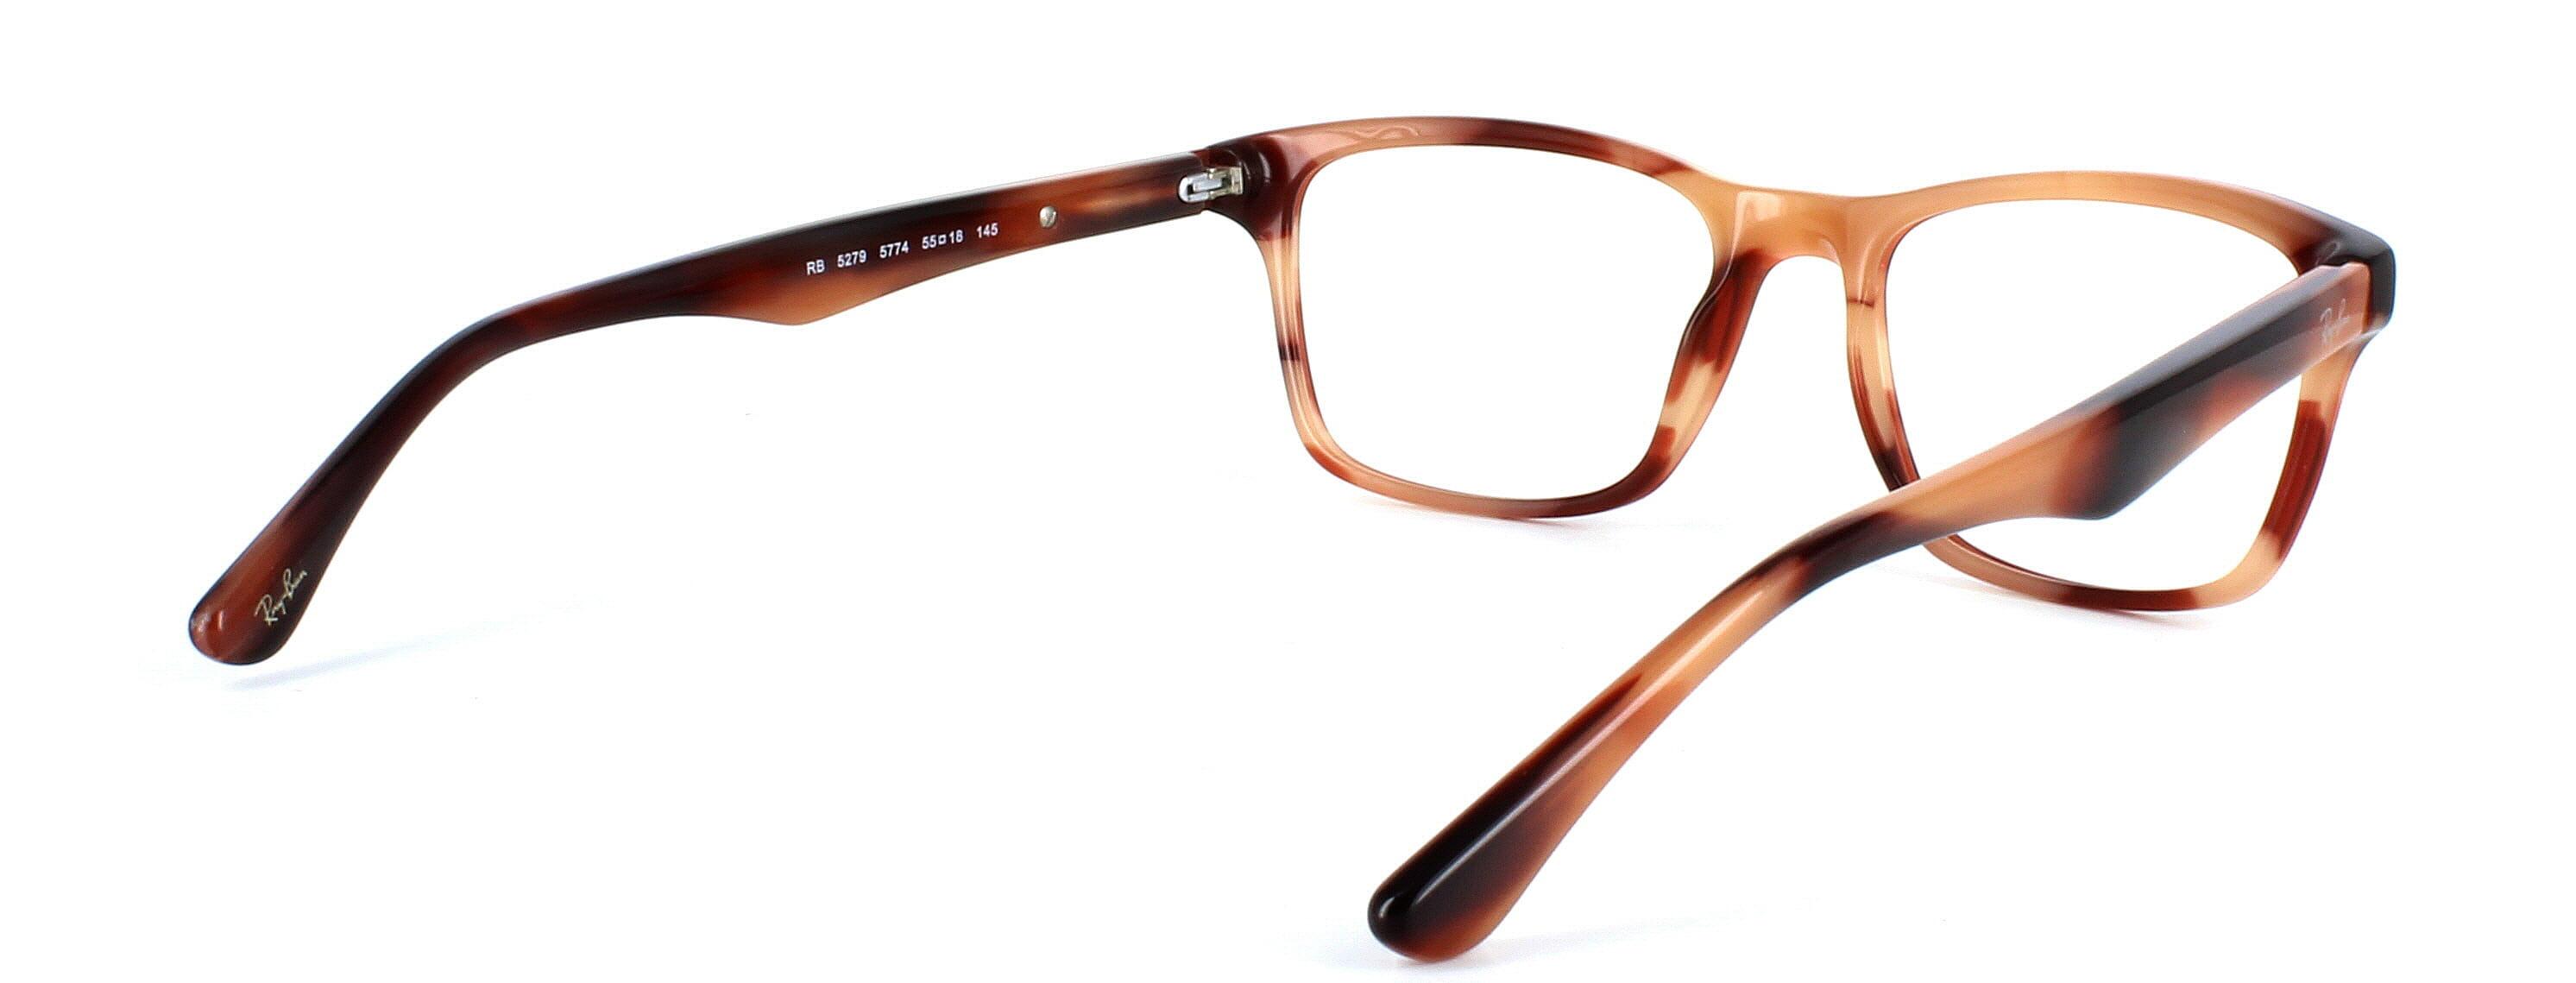 Unisex acetate glasses by Ray Ban. Model 5279 5774 - mottled brown - image view 5